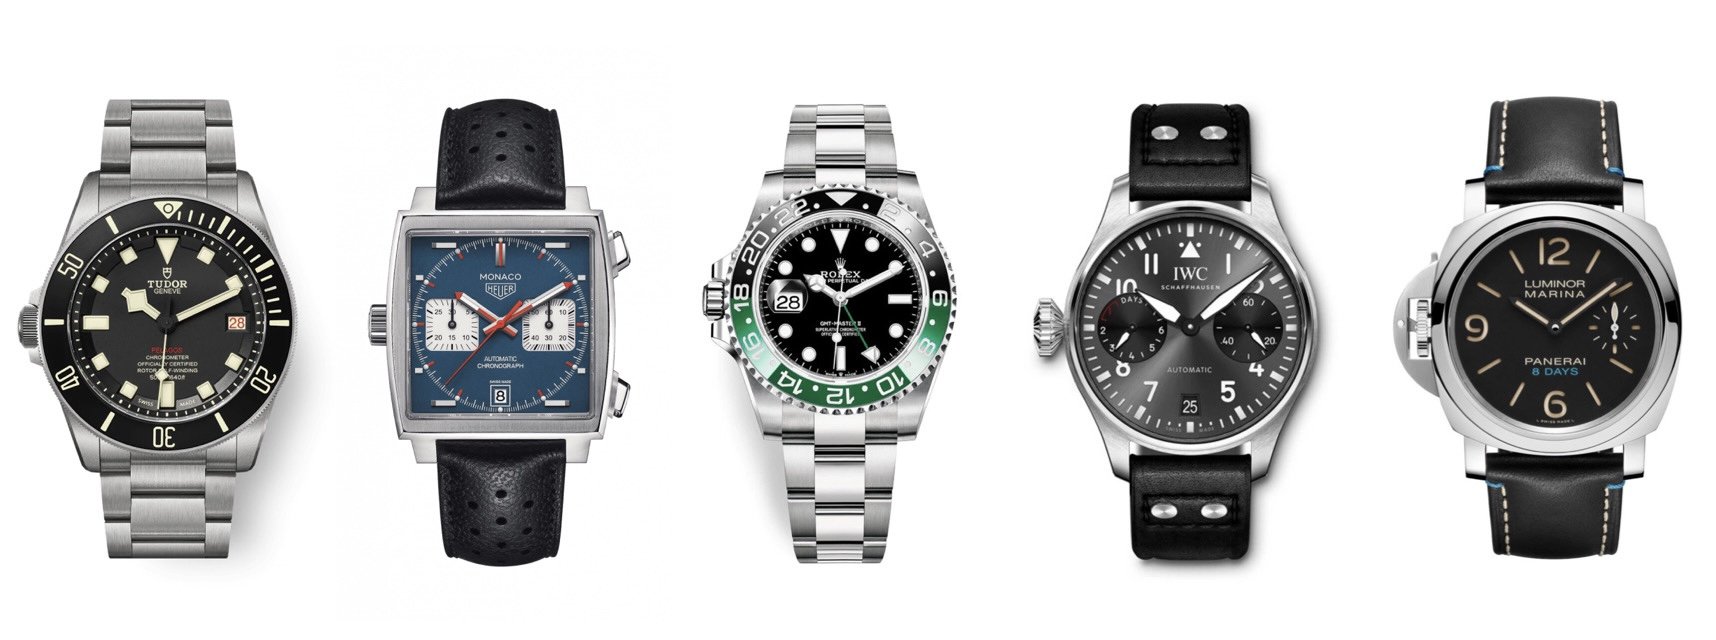 11 Best Left-Handed Watches - Rolex, Panerai, IWC, Tag Heuer and More —  Wrist Enthusiast